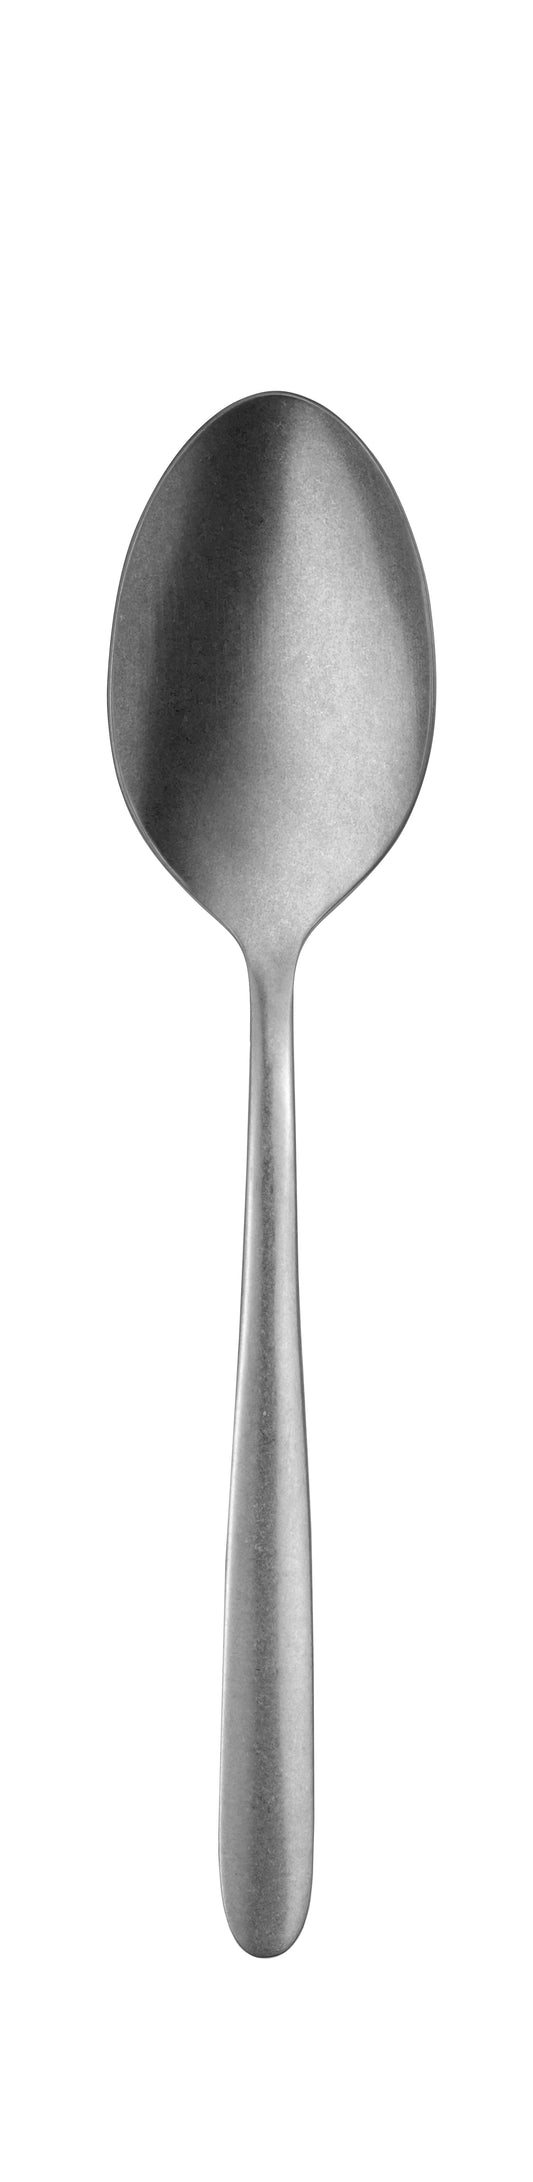 Table spoon MB ECCO stonewashed 217mm